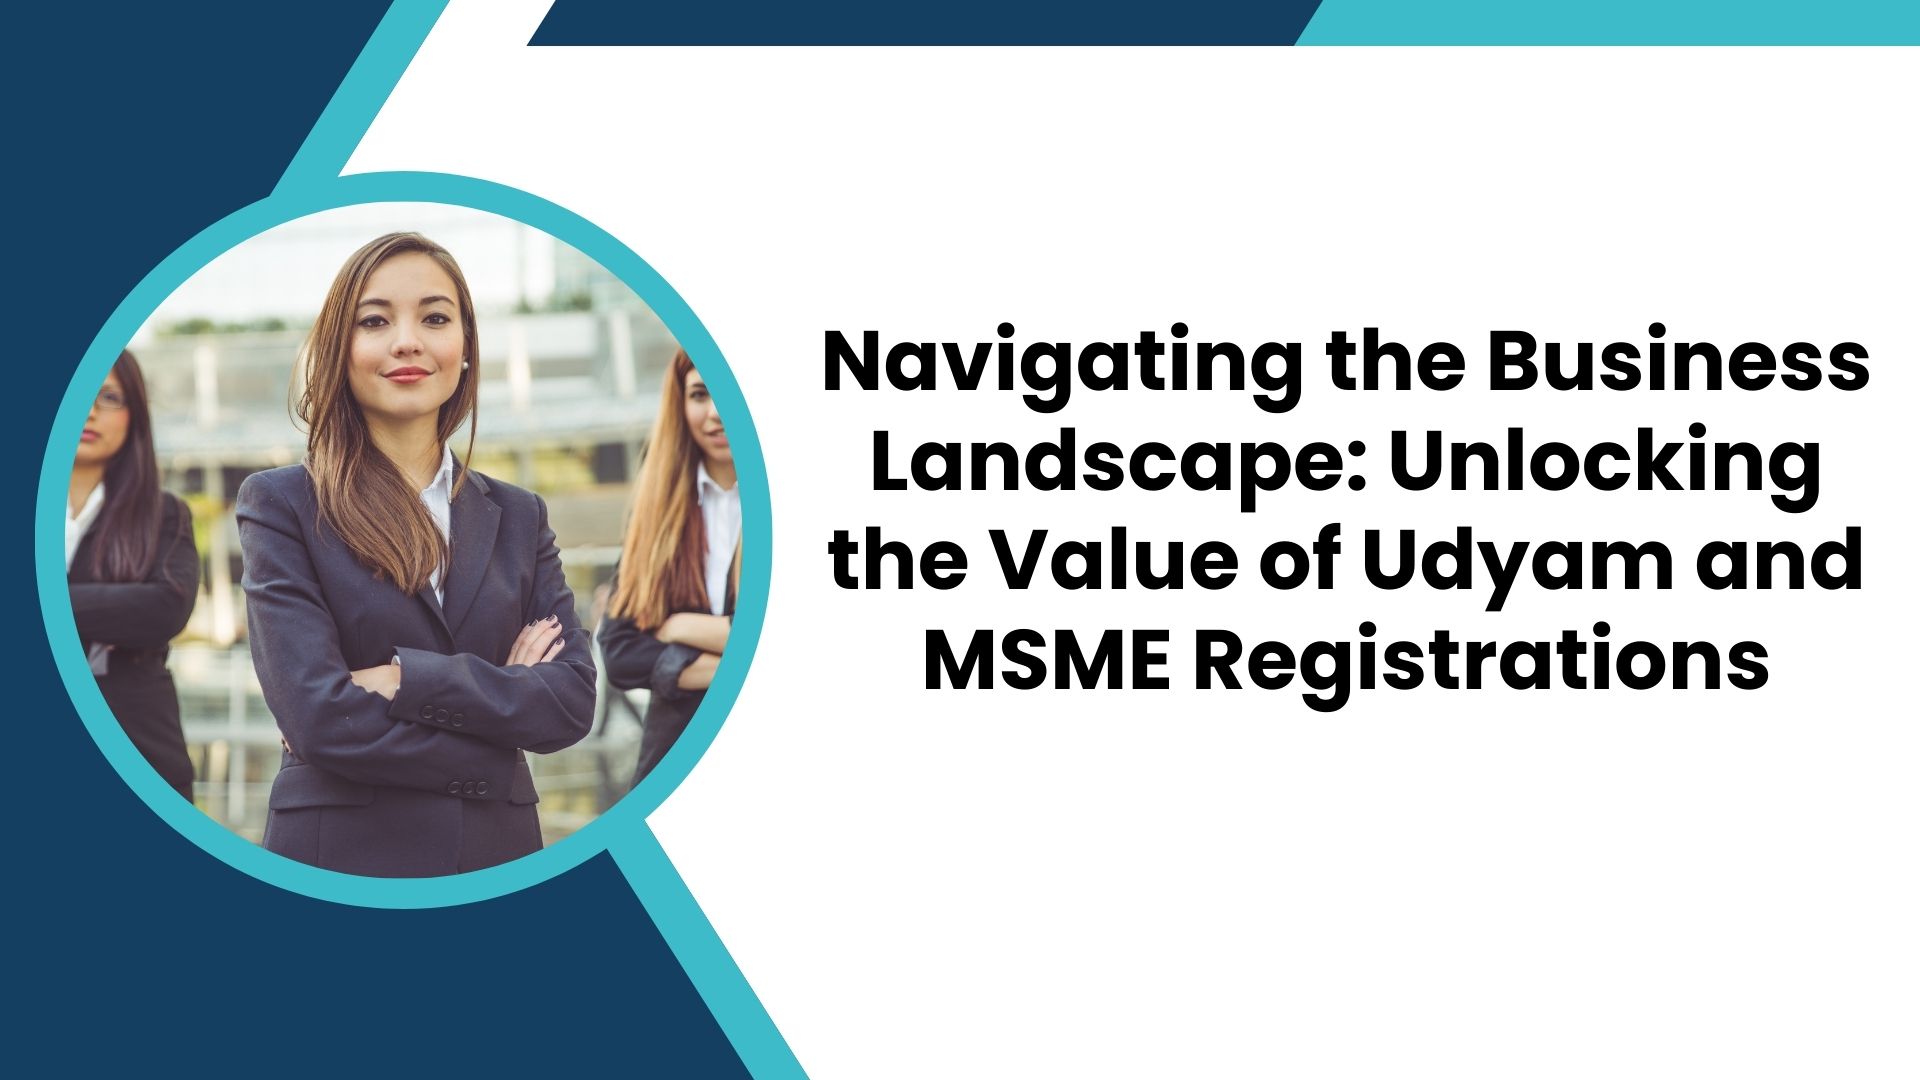 Navigating the Business Landscape: Unlocking the Value of Udyam and MSME Registrations